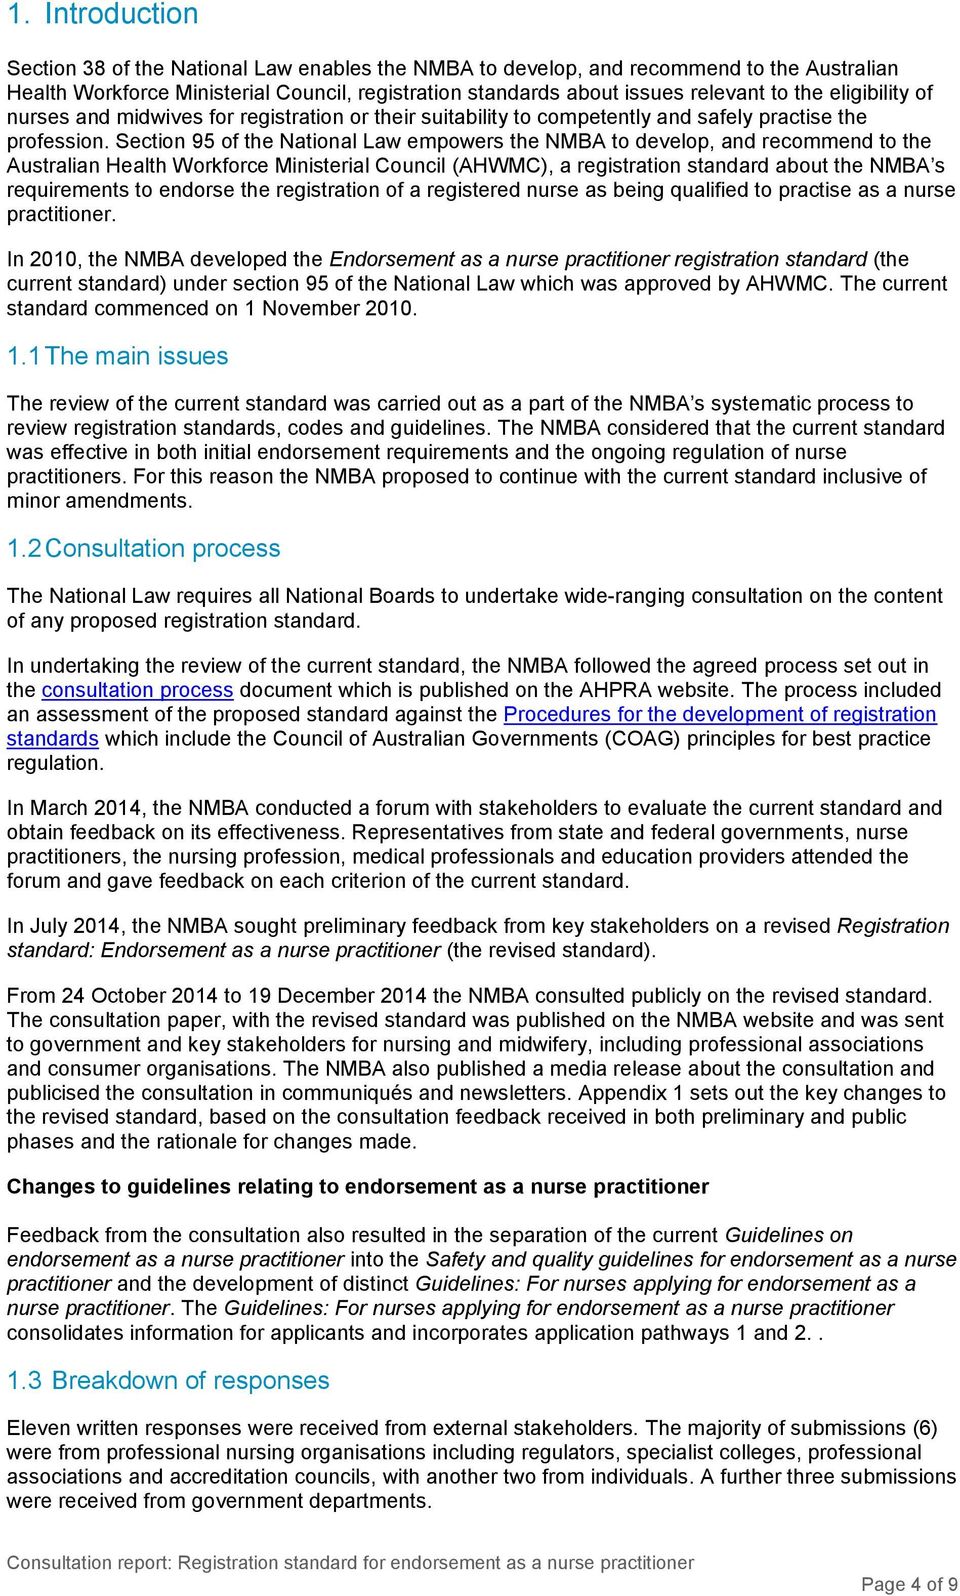 Section 95 of the National Law empowers the NMBA to develop, and recommend to the Australian Health Workforce Ministerial Council (AHWMC), a registration standard about the NMBA s requirements to